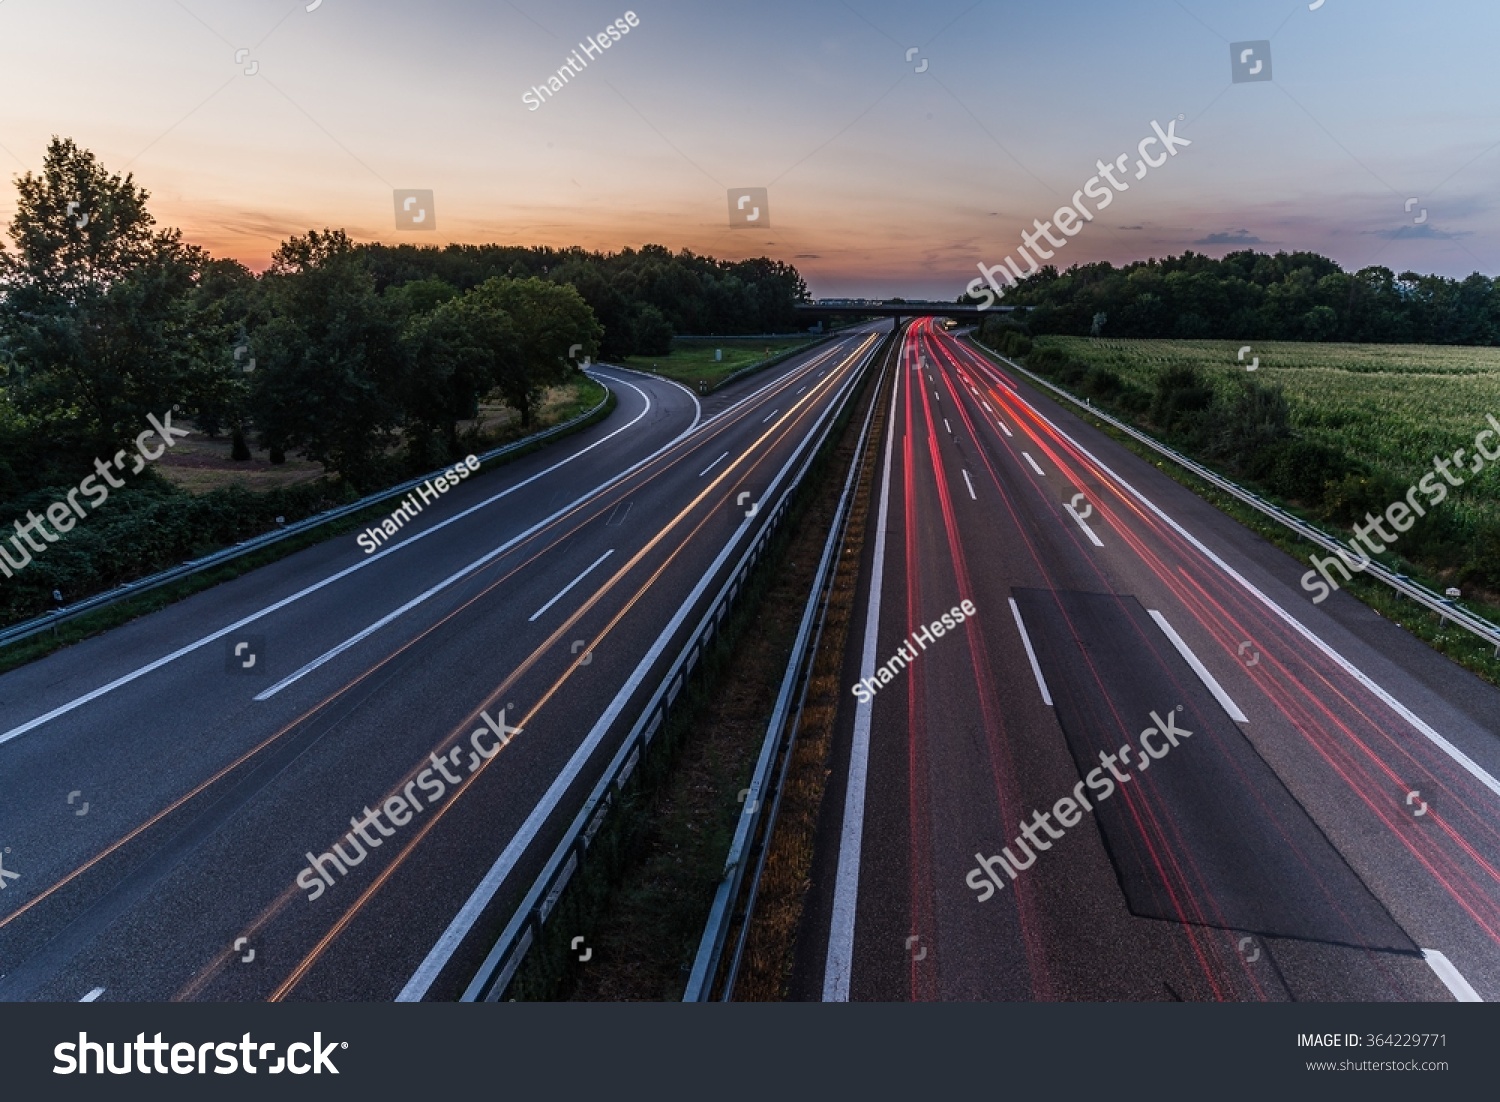 sunset over a german highway #364229771